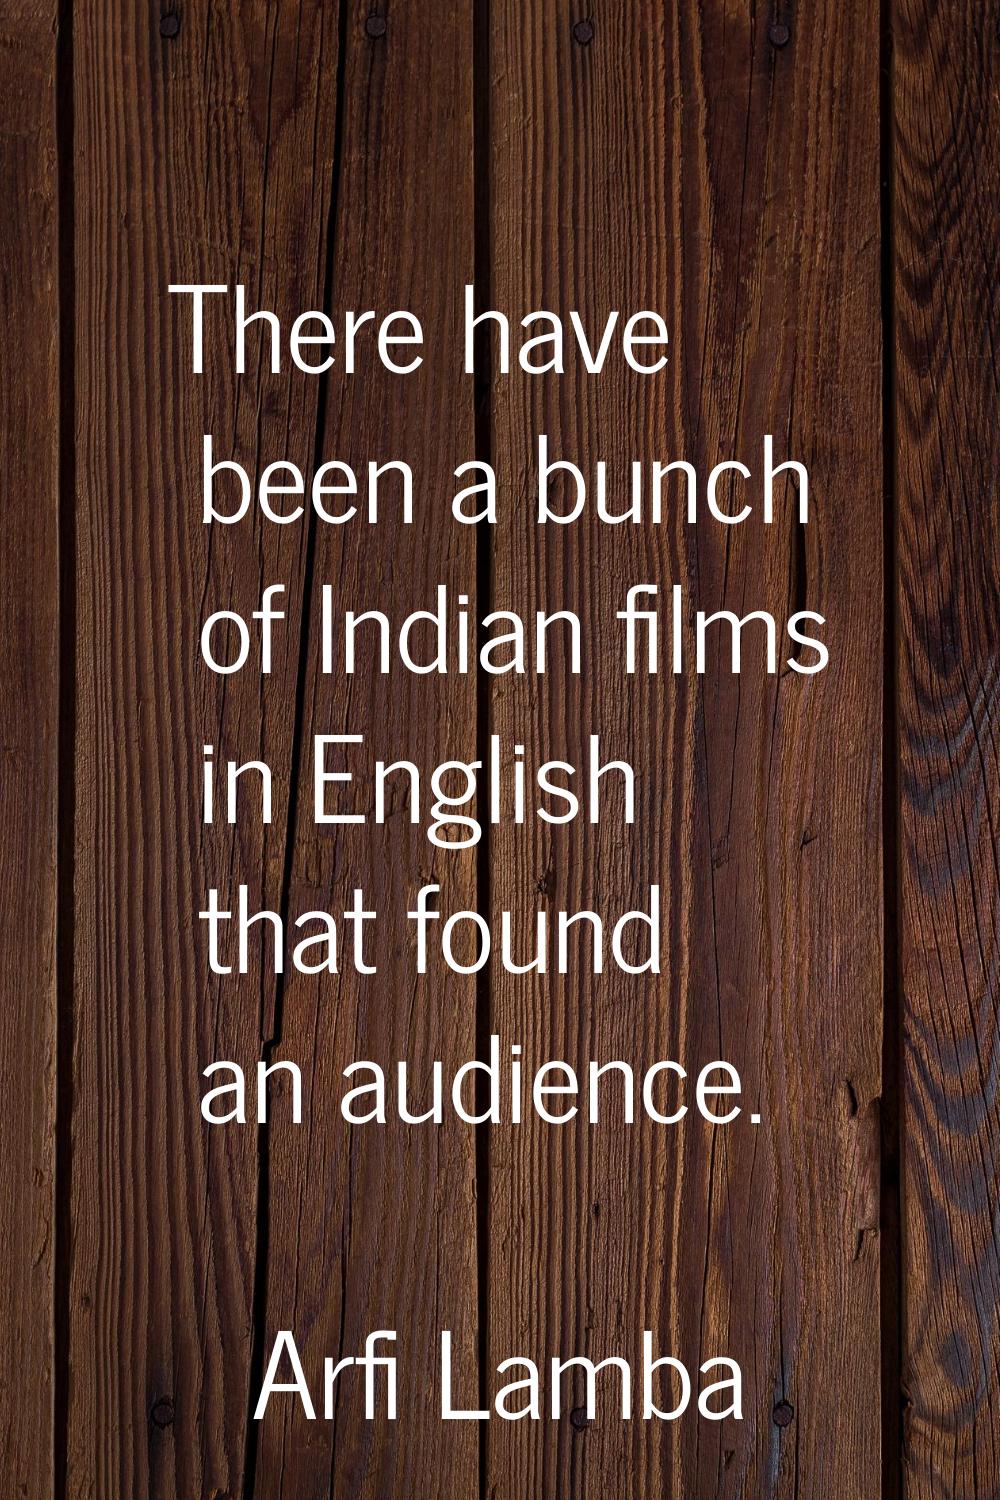 There have been a bunch of Indian films in English that found an audience.